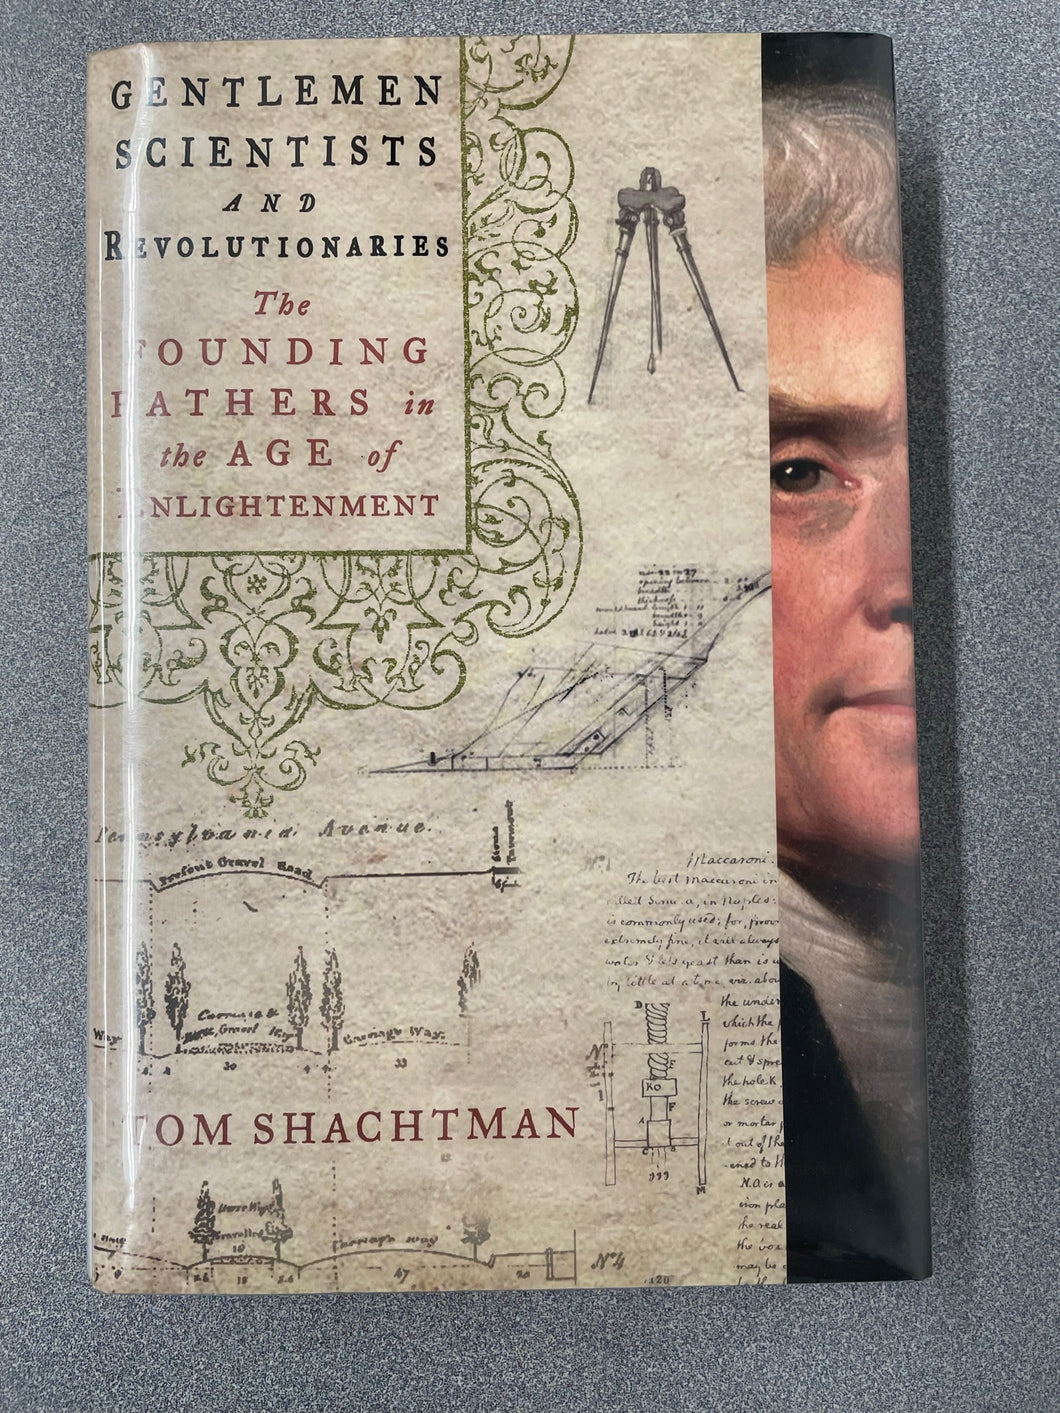 Gentlemen Scientists and Revolutionaries: The Founding Fathers in the Age of Enlightenment, Shachtman, Tom [2014] AN 7/23